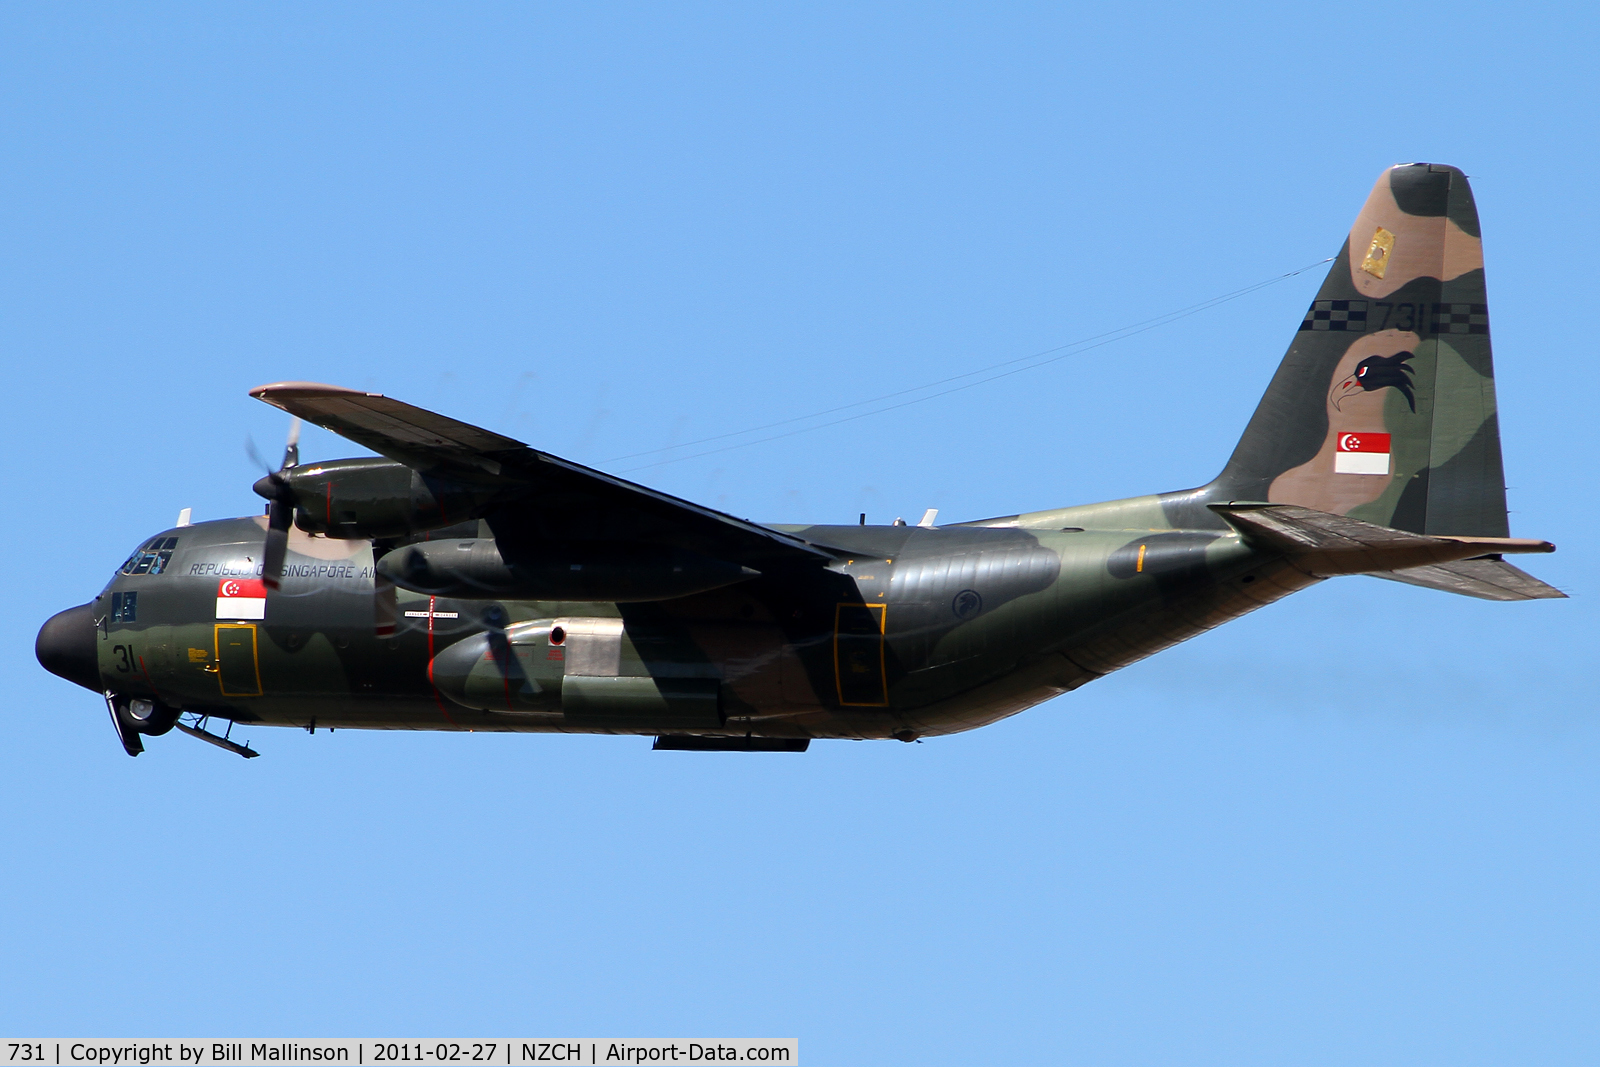 731, 1980 Lockheed C-130H Hercules C/N 382-4844, after delivery of SAR personnel to assist in the rescue mission in Christchurch